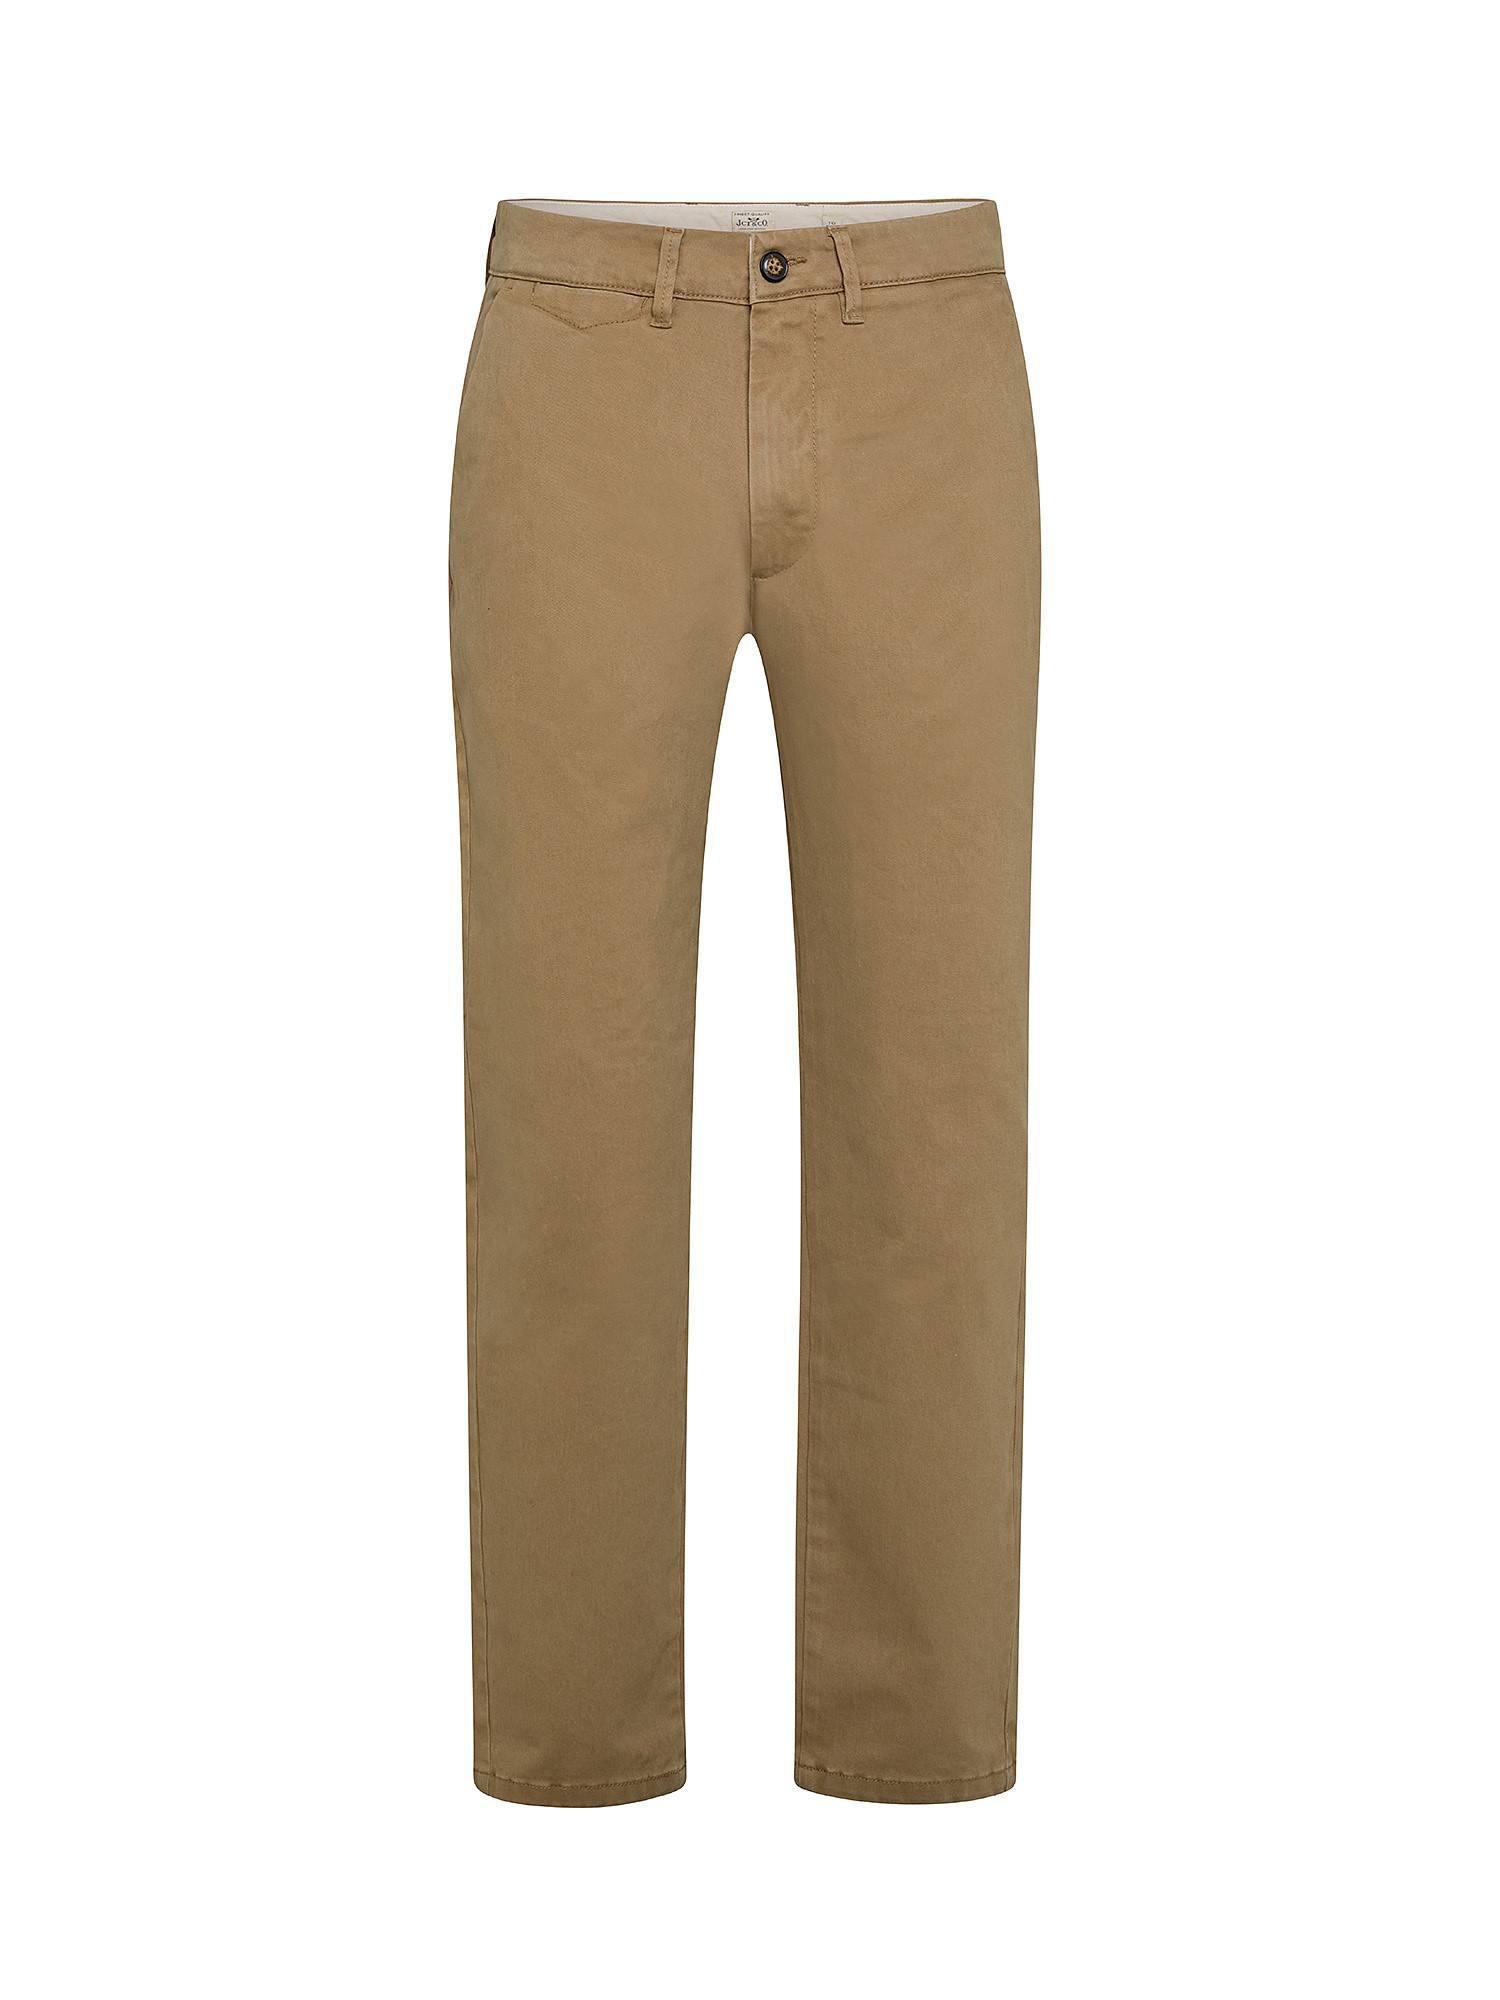 Stretch cotton chinos trousers, Light Brown, large image number 0